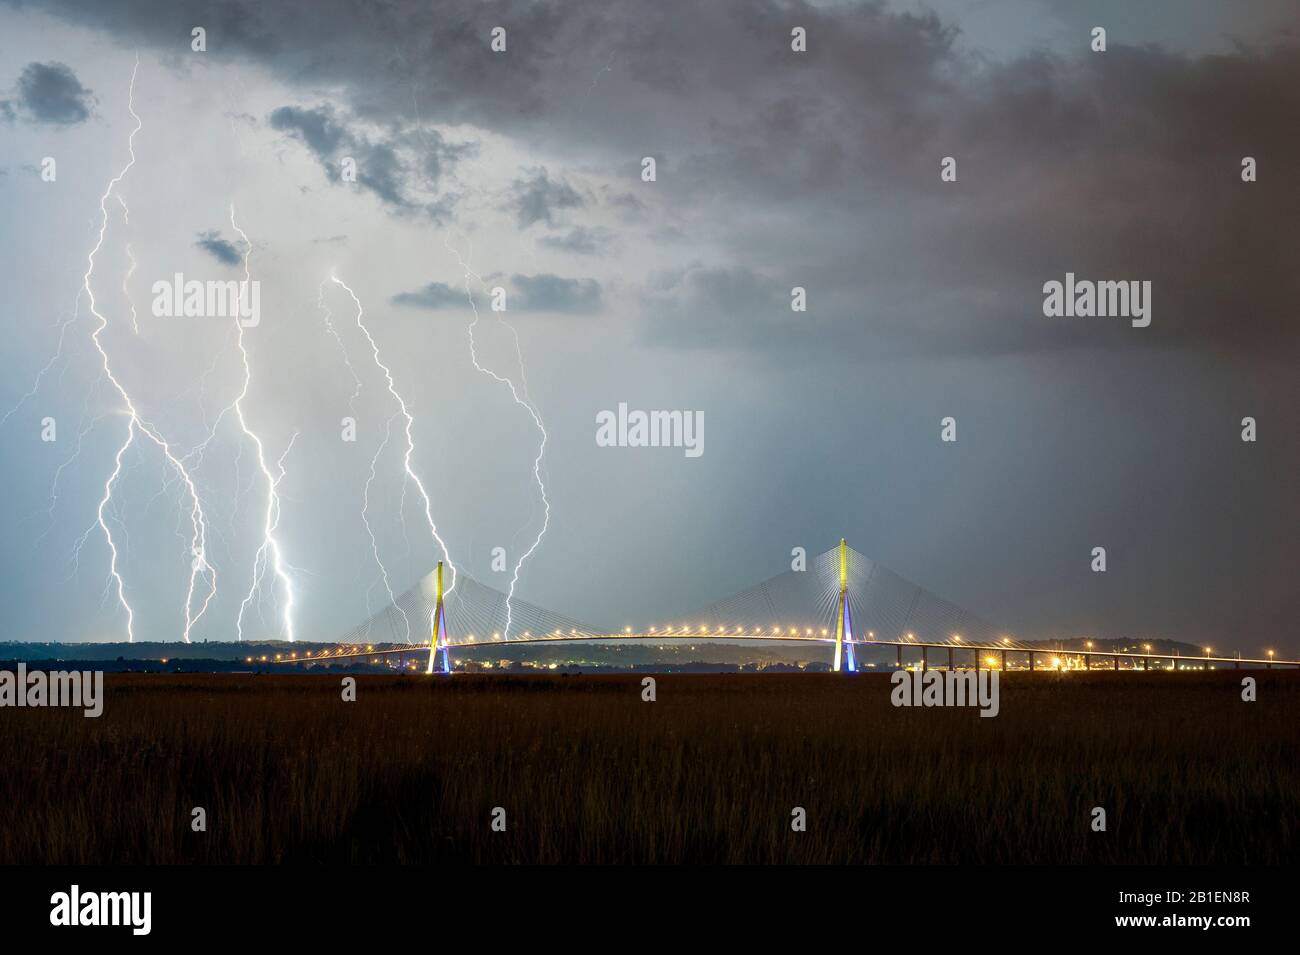 Thunderstorm over Le Havre and Normandy viaduct, France Stock Photo